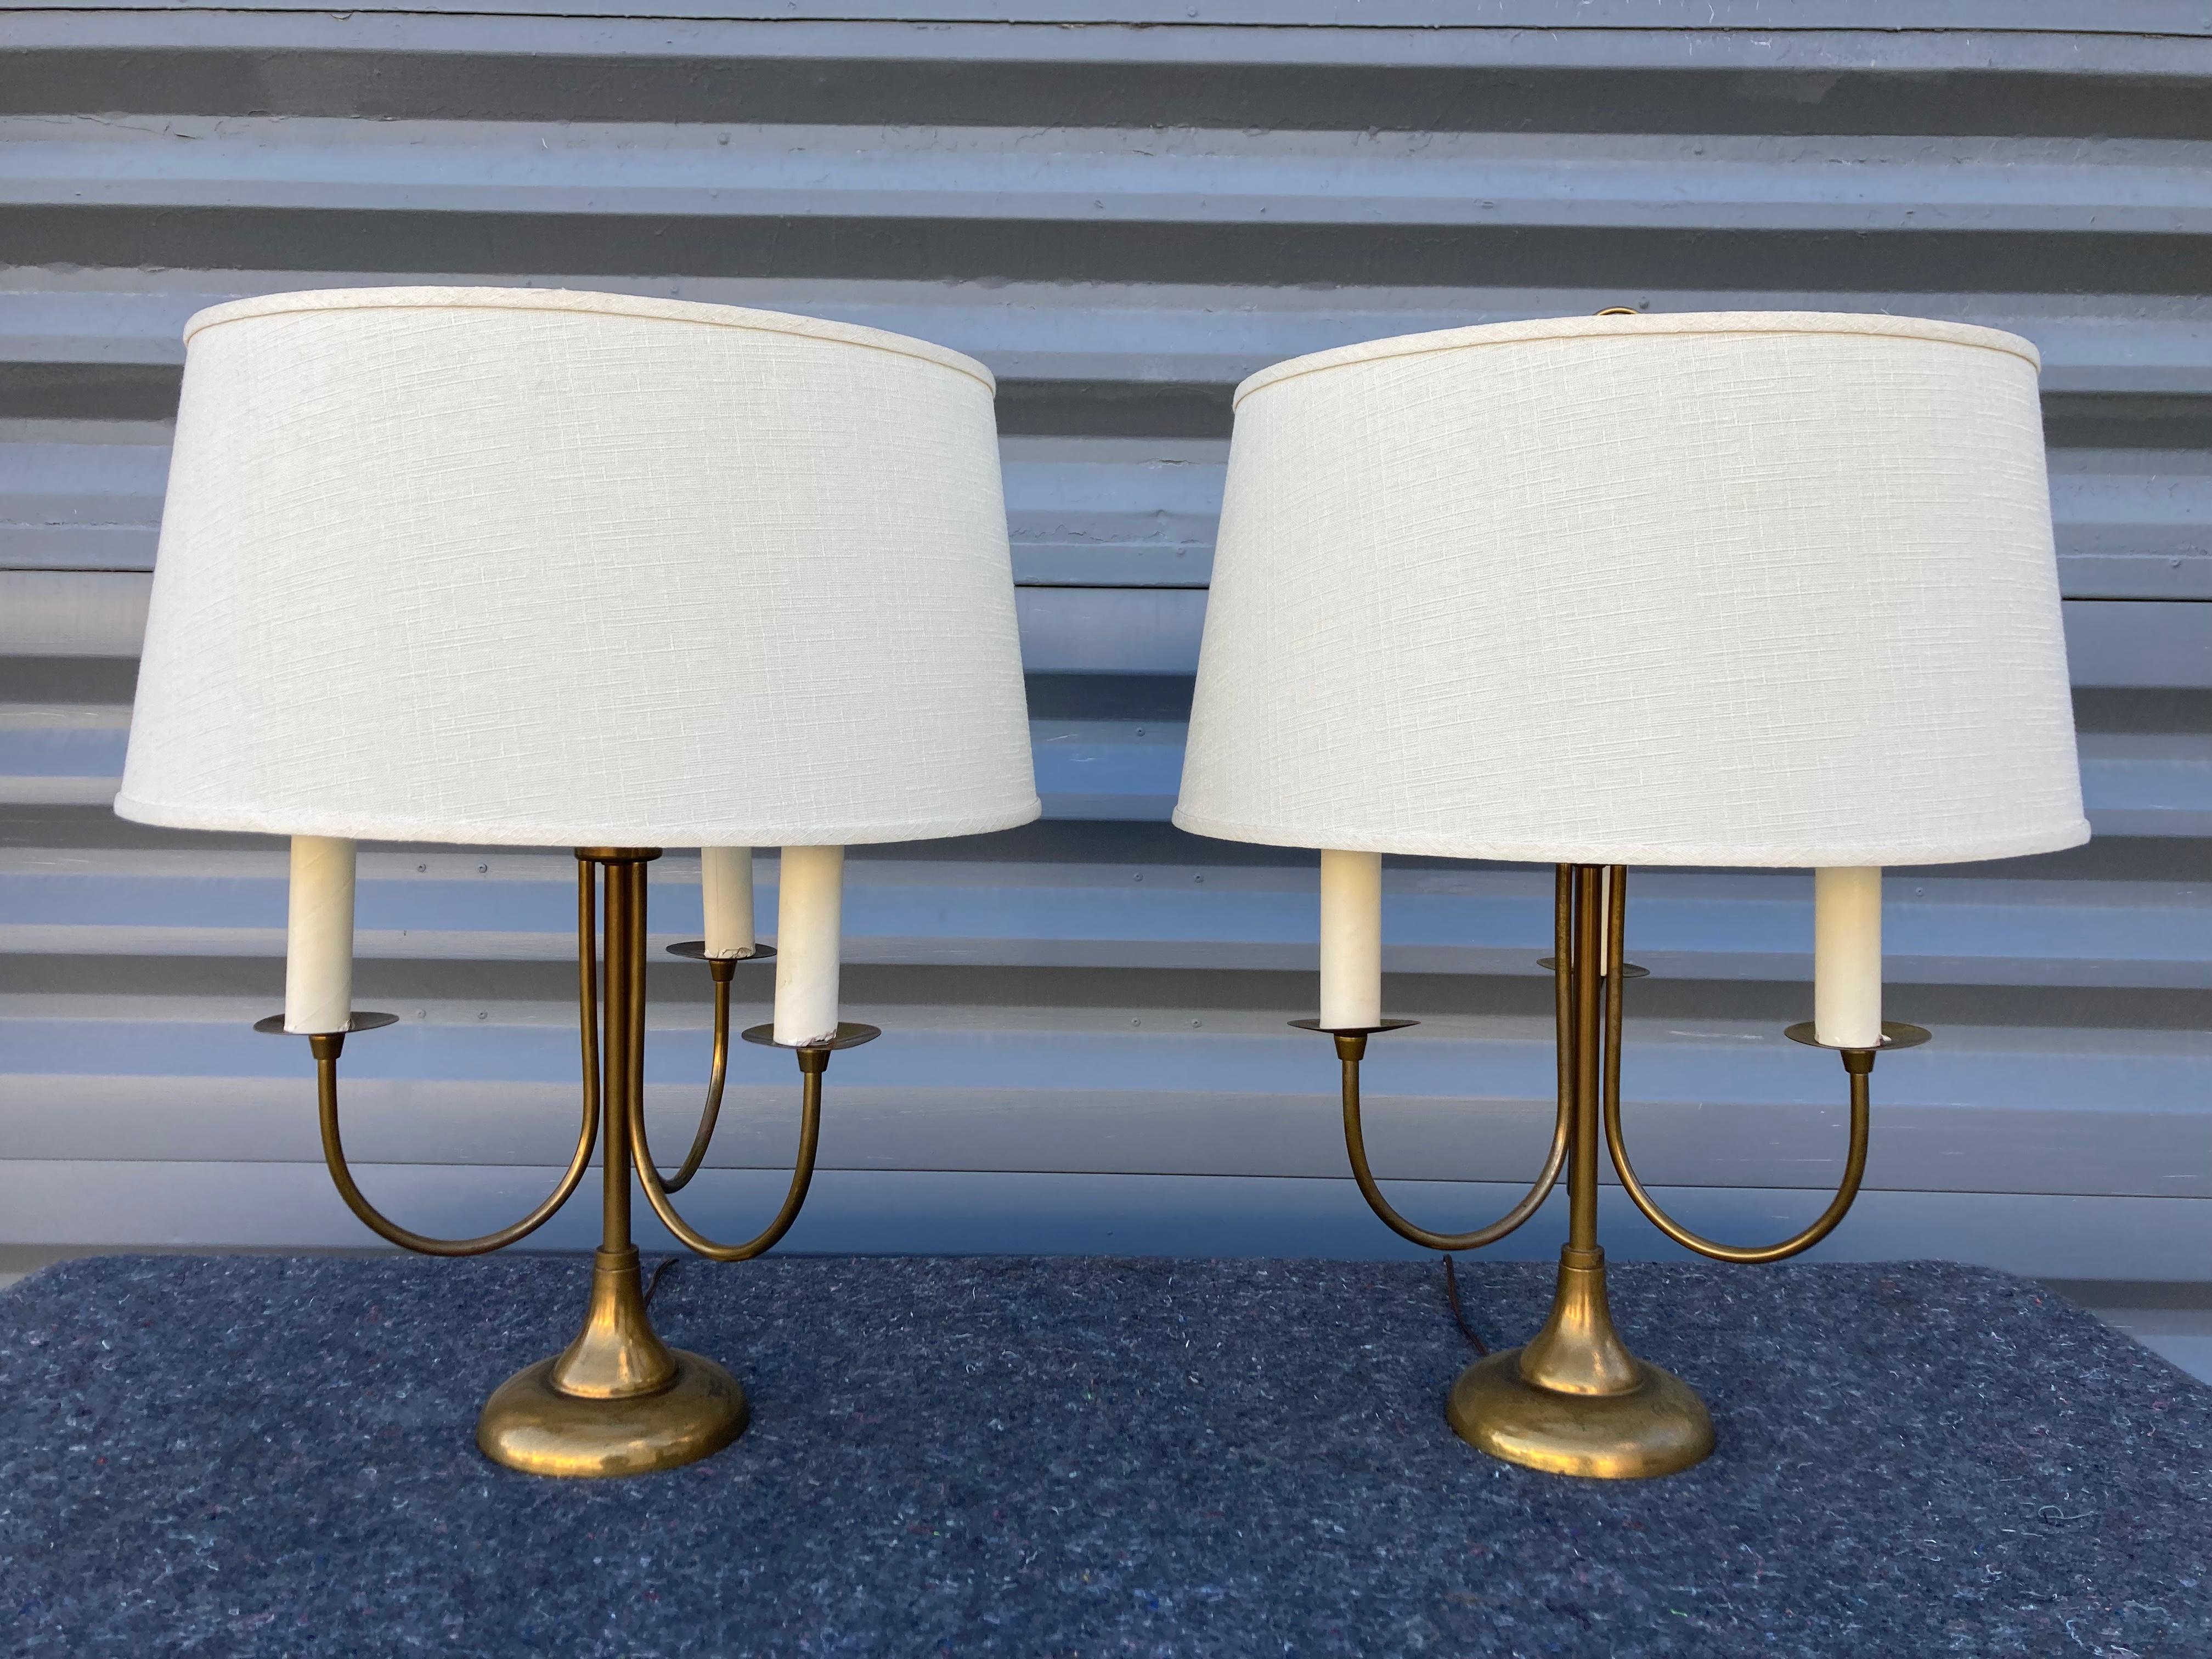 Pair of Mid-Century Modern Table Lamps, Brass, USA, 1950s In Good Condition For Sale In Miami, FL